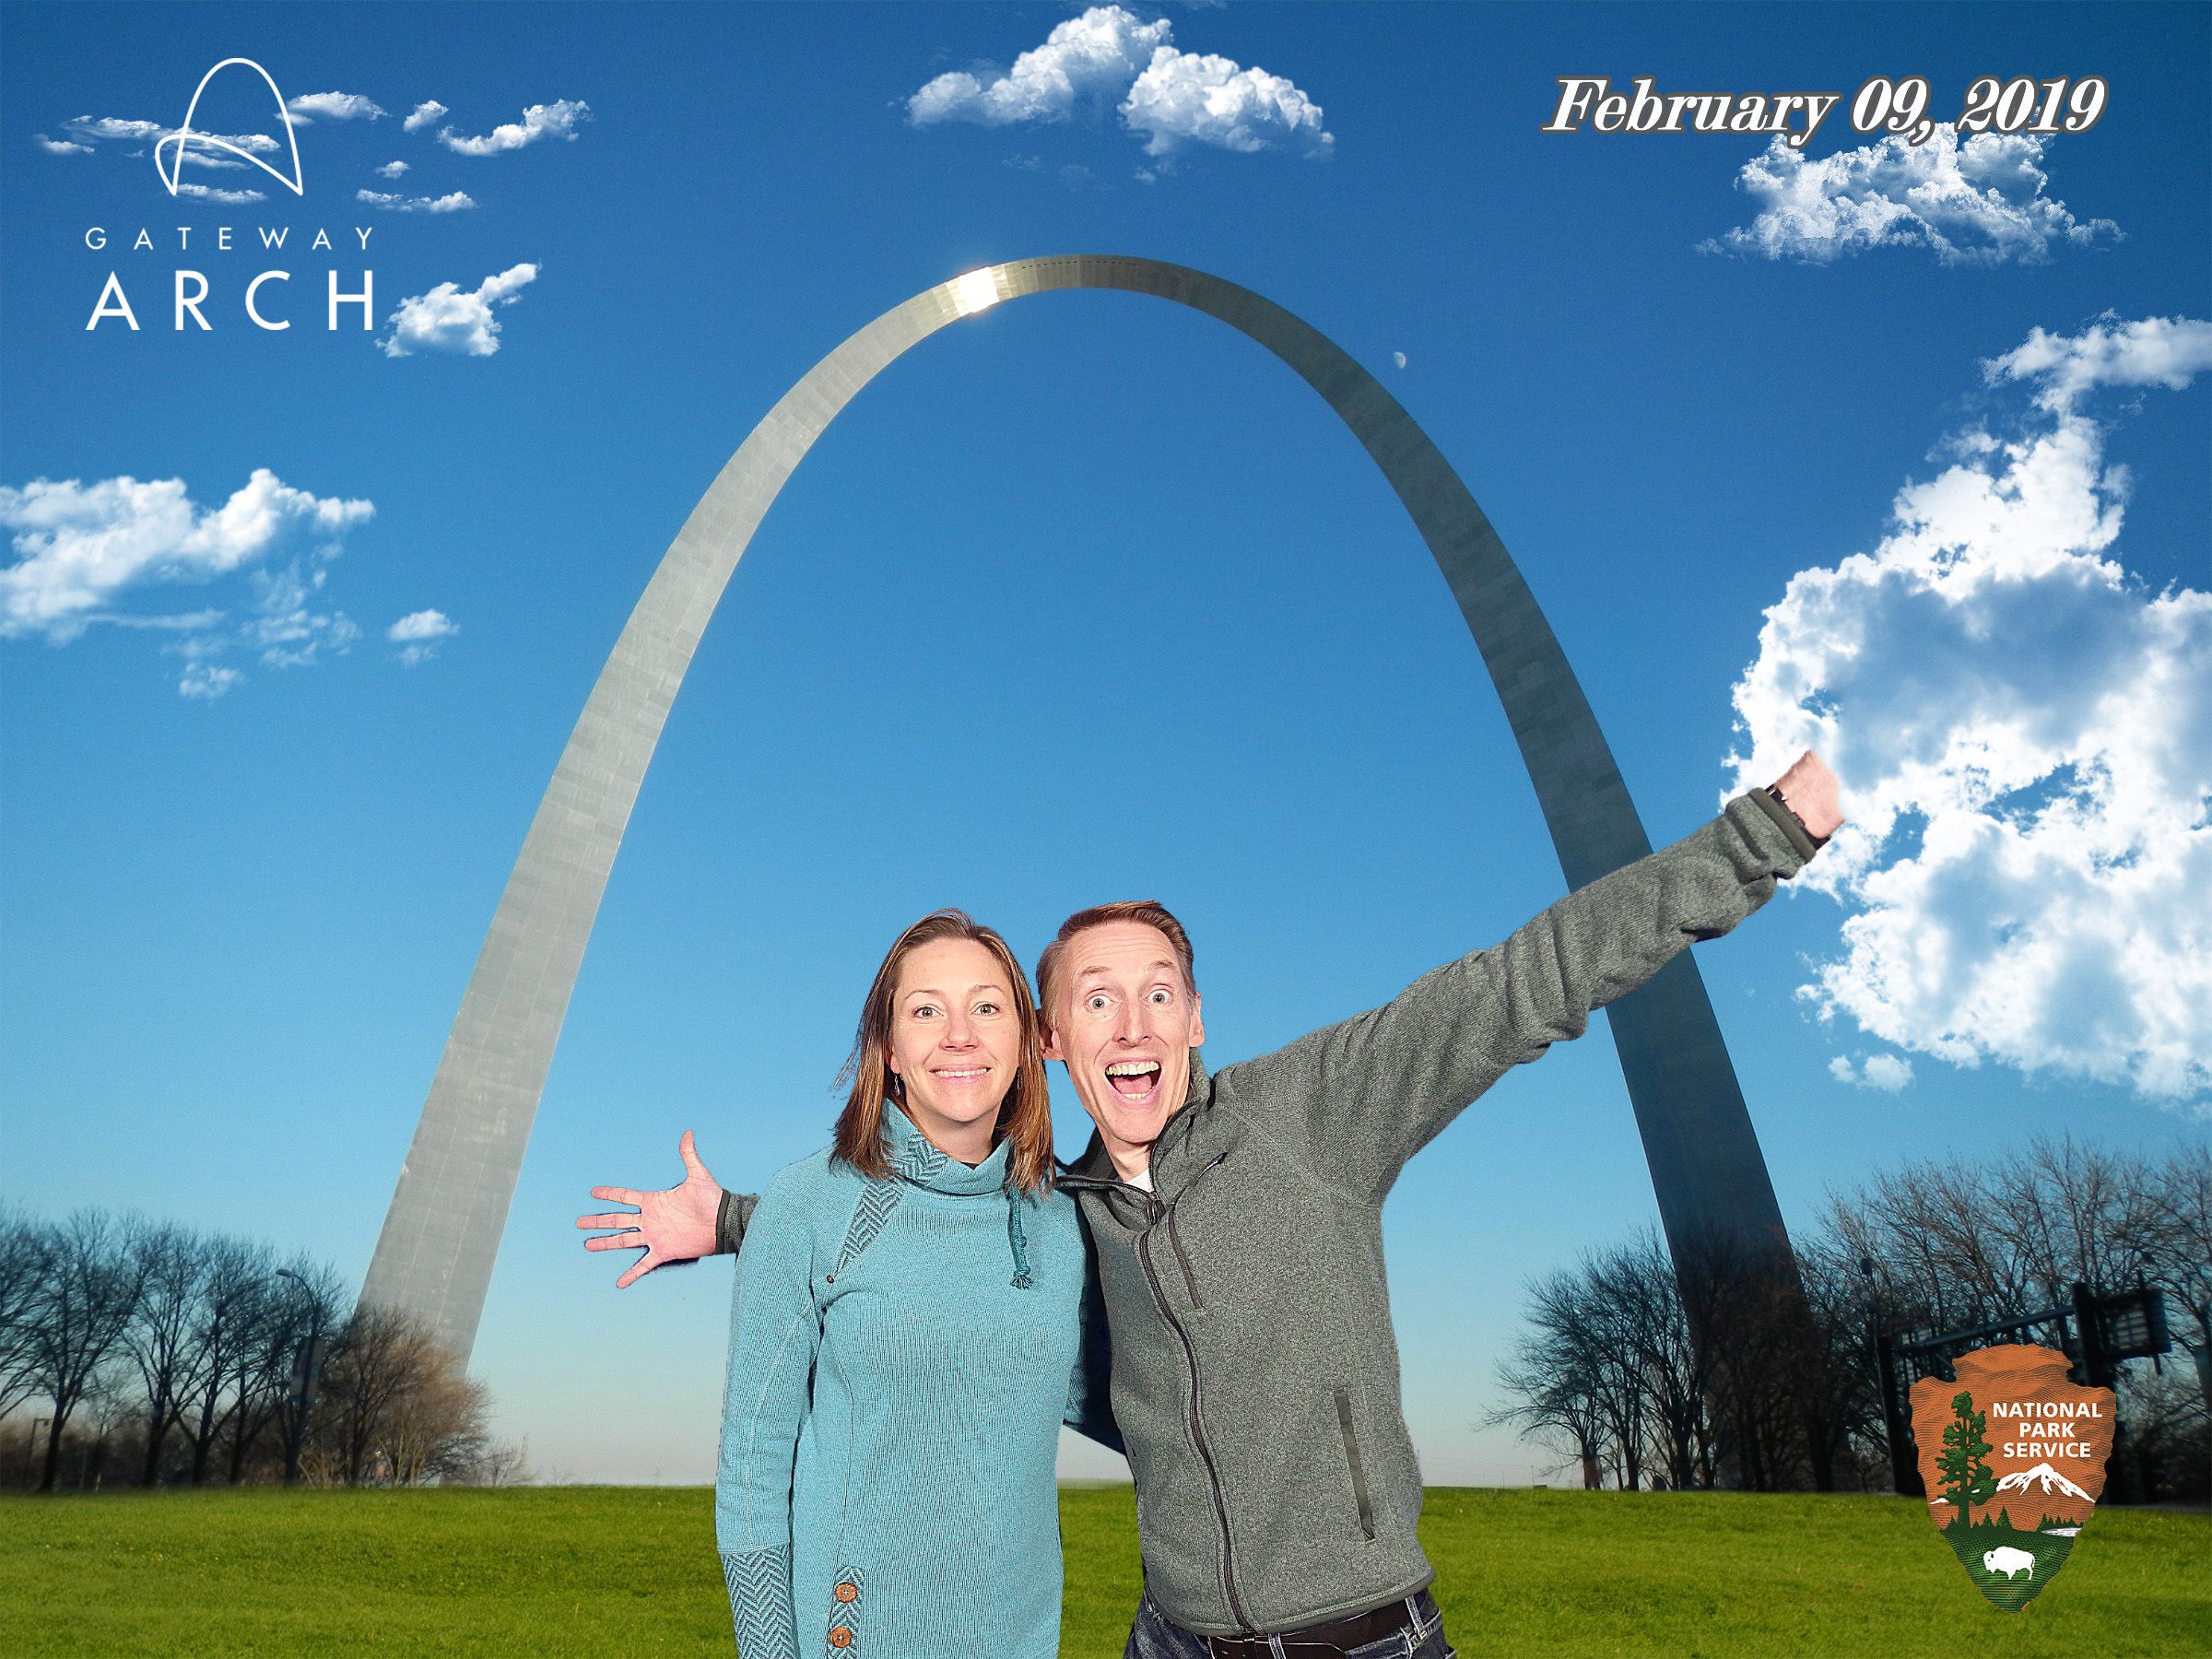 How to Visit Gateway Arch National Park in St. Louis | Earth Trekkers